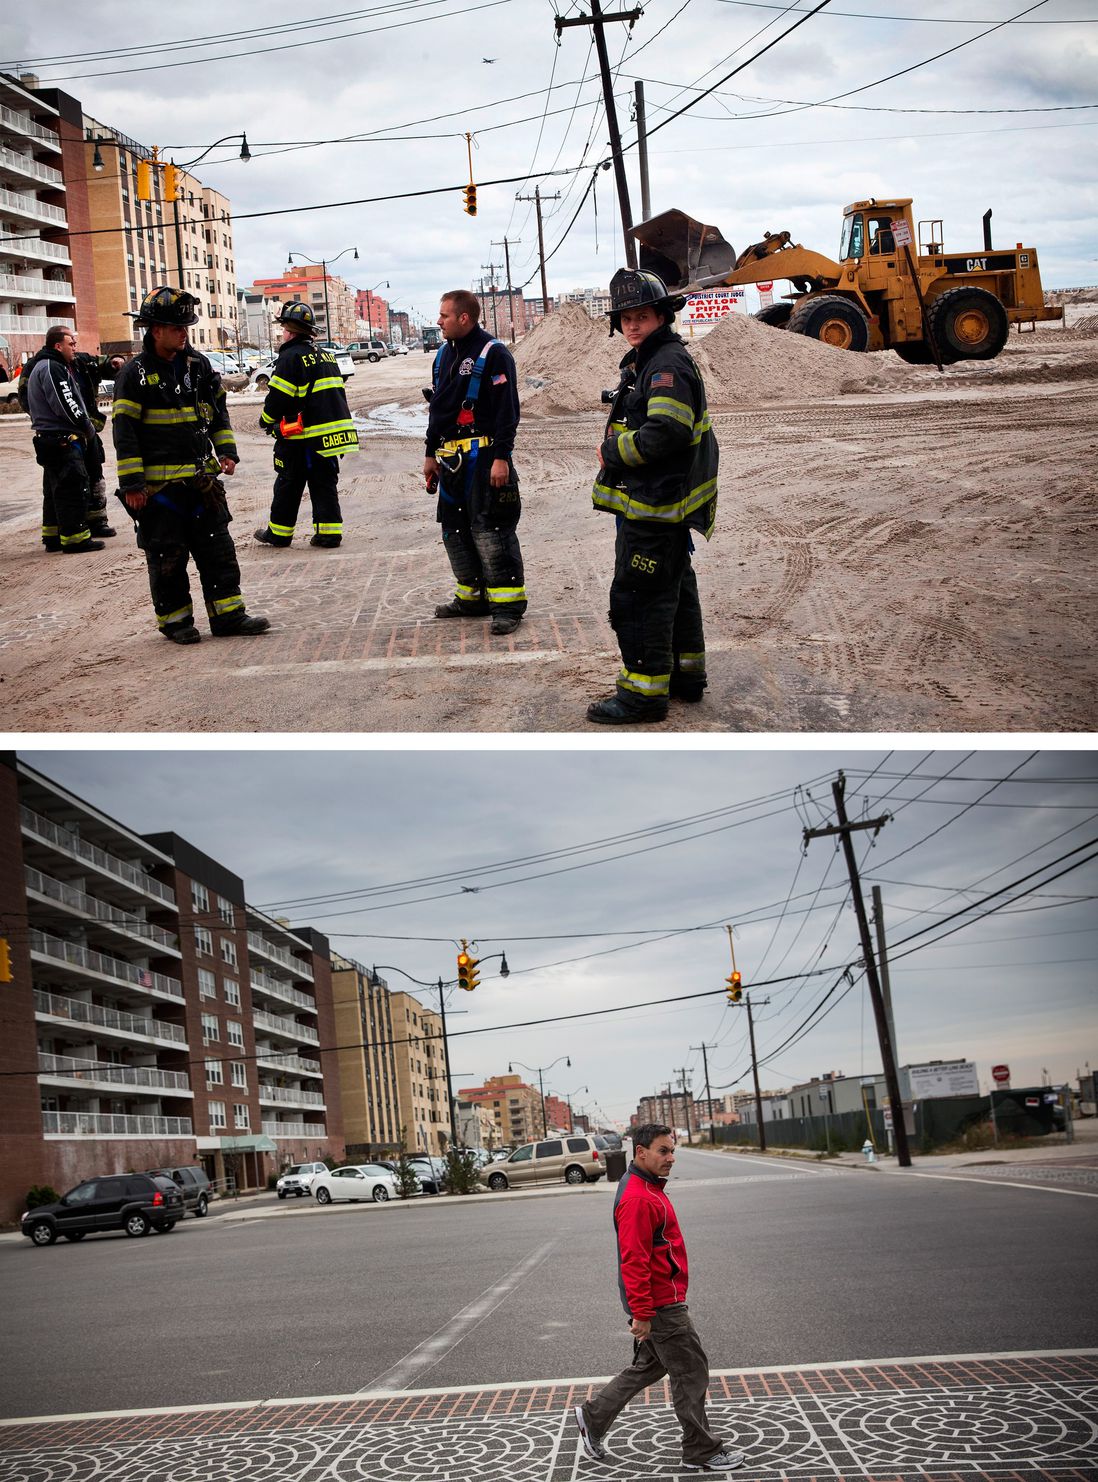 [Top] Fire fighters walk the streets of Long beach, which experienced heavy flooding and dune erosion due to Hurricane Sand October 31, 2012 in Long Beach, New York. [Bottom] A man crosses the street in Long Beach, New York Octobter 22, 2013.